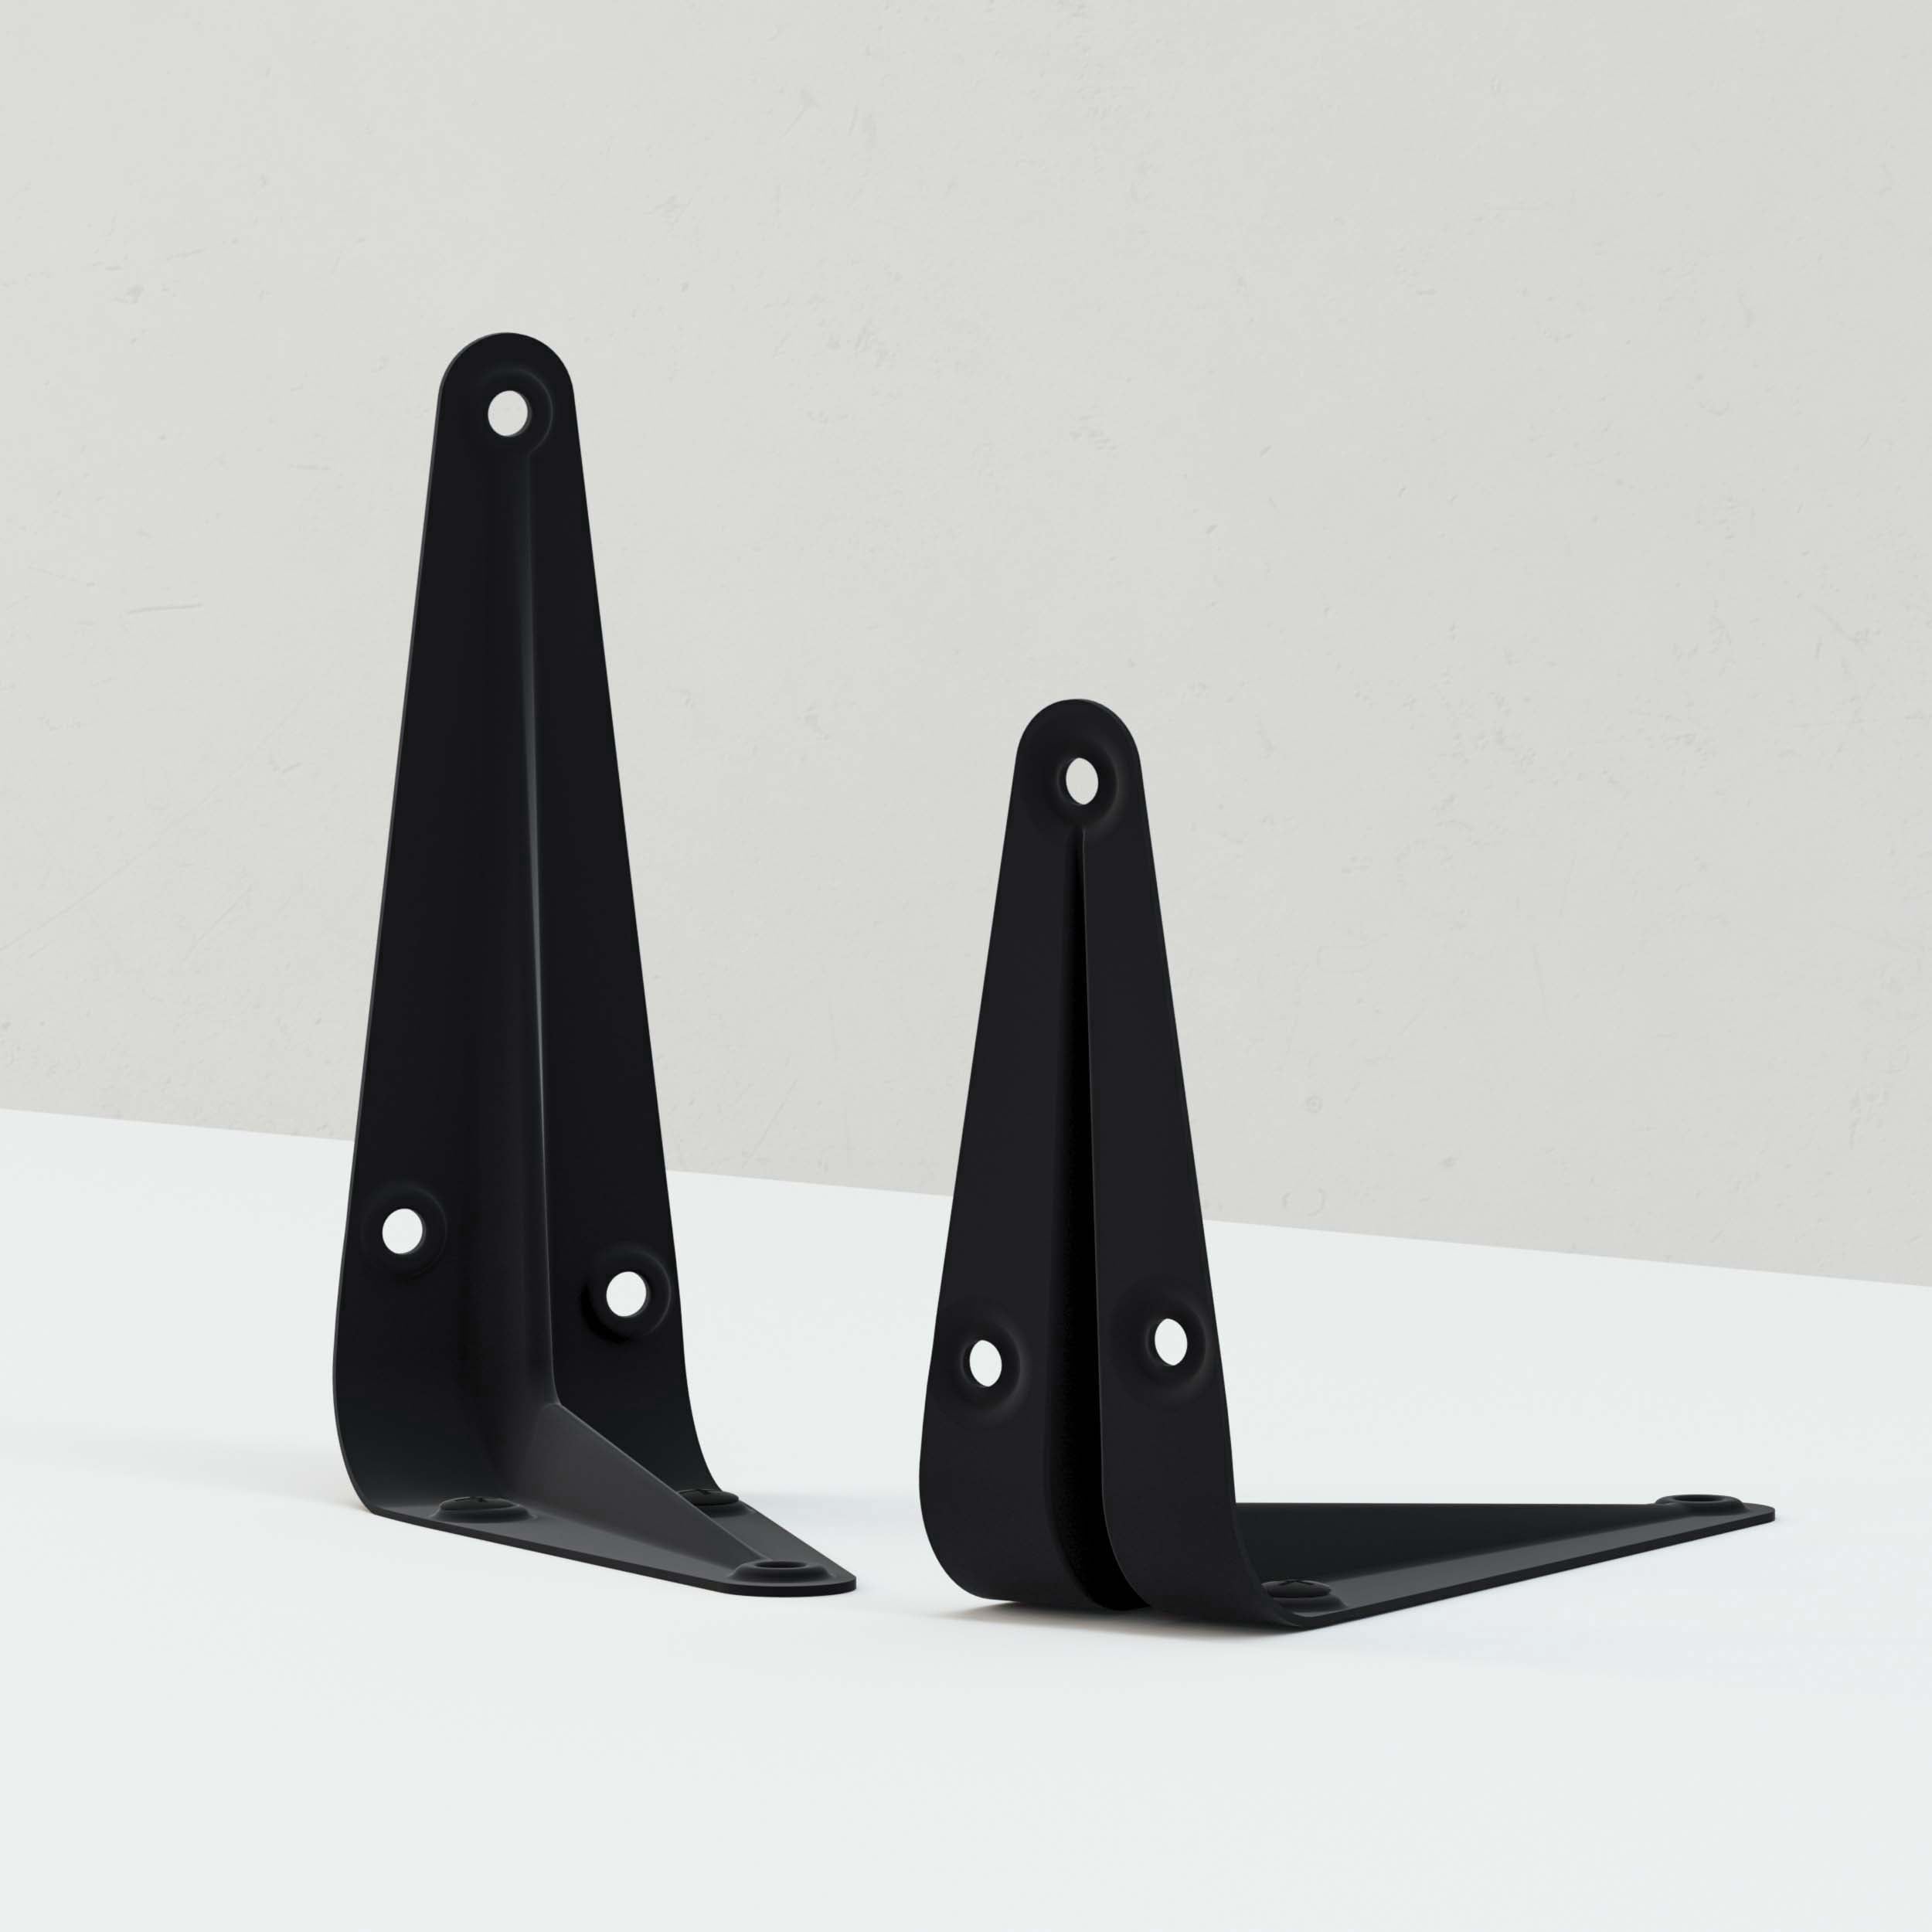 Sturdy black metal heavy duty shelf brackets for wall mounting and DIY shelving projects.